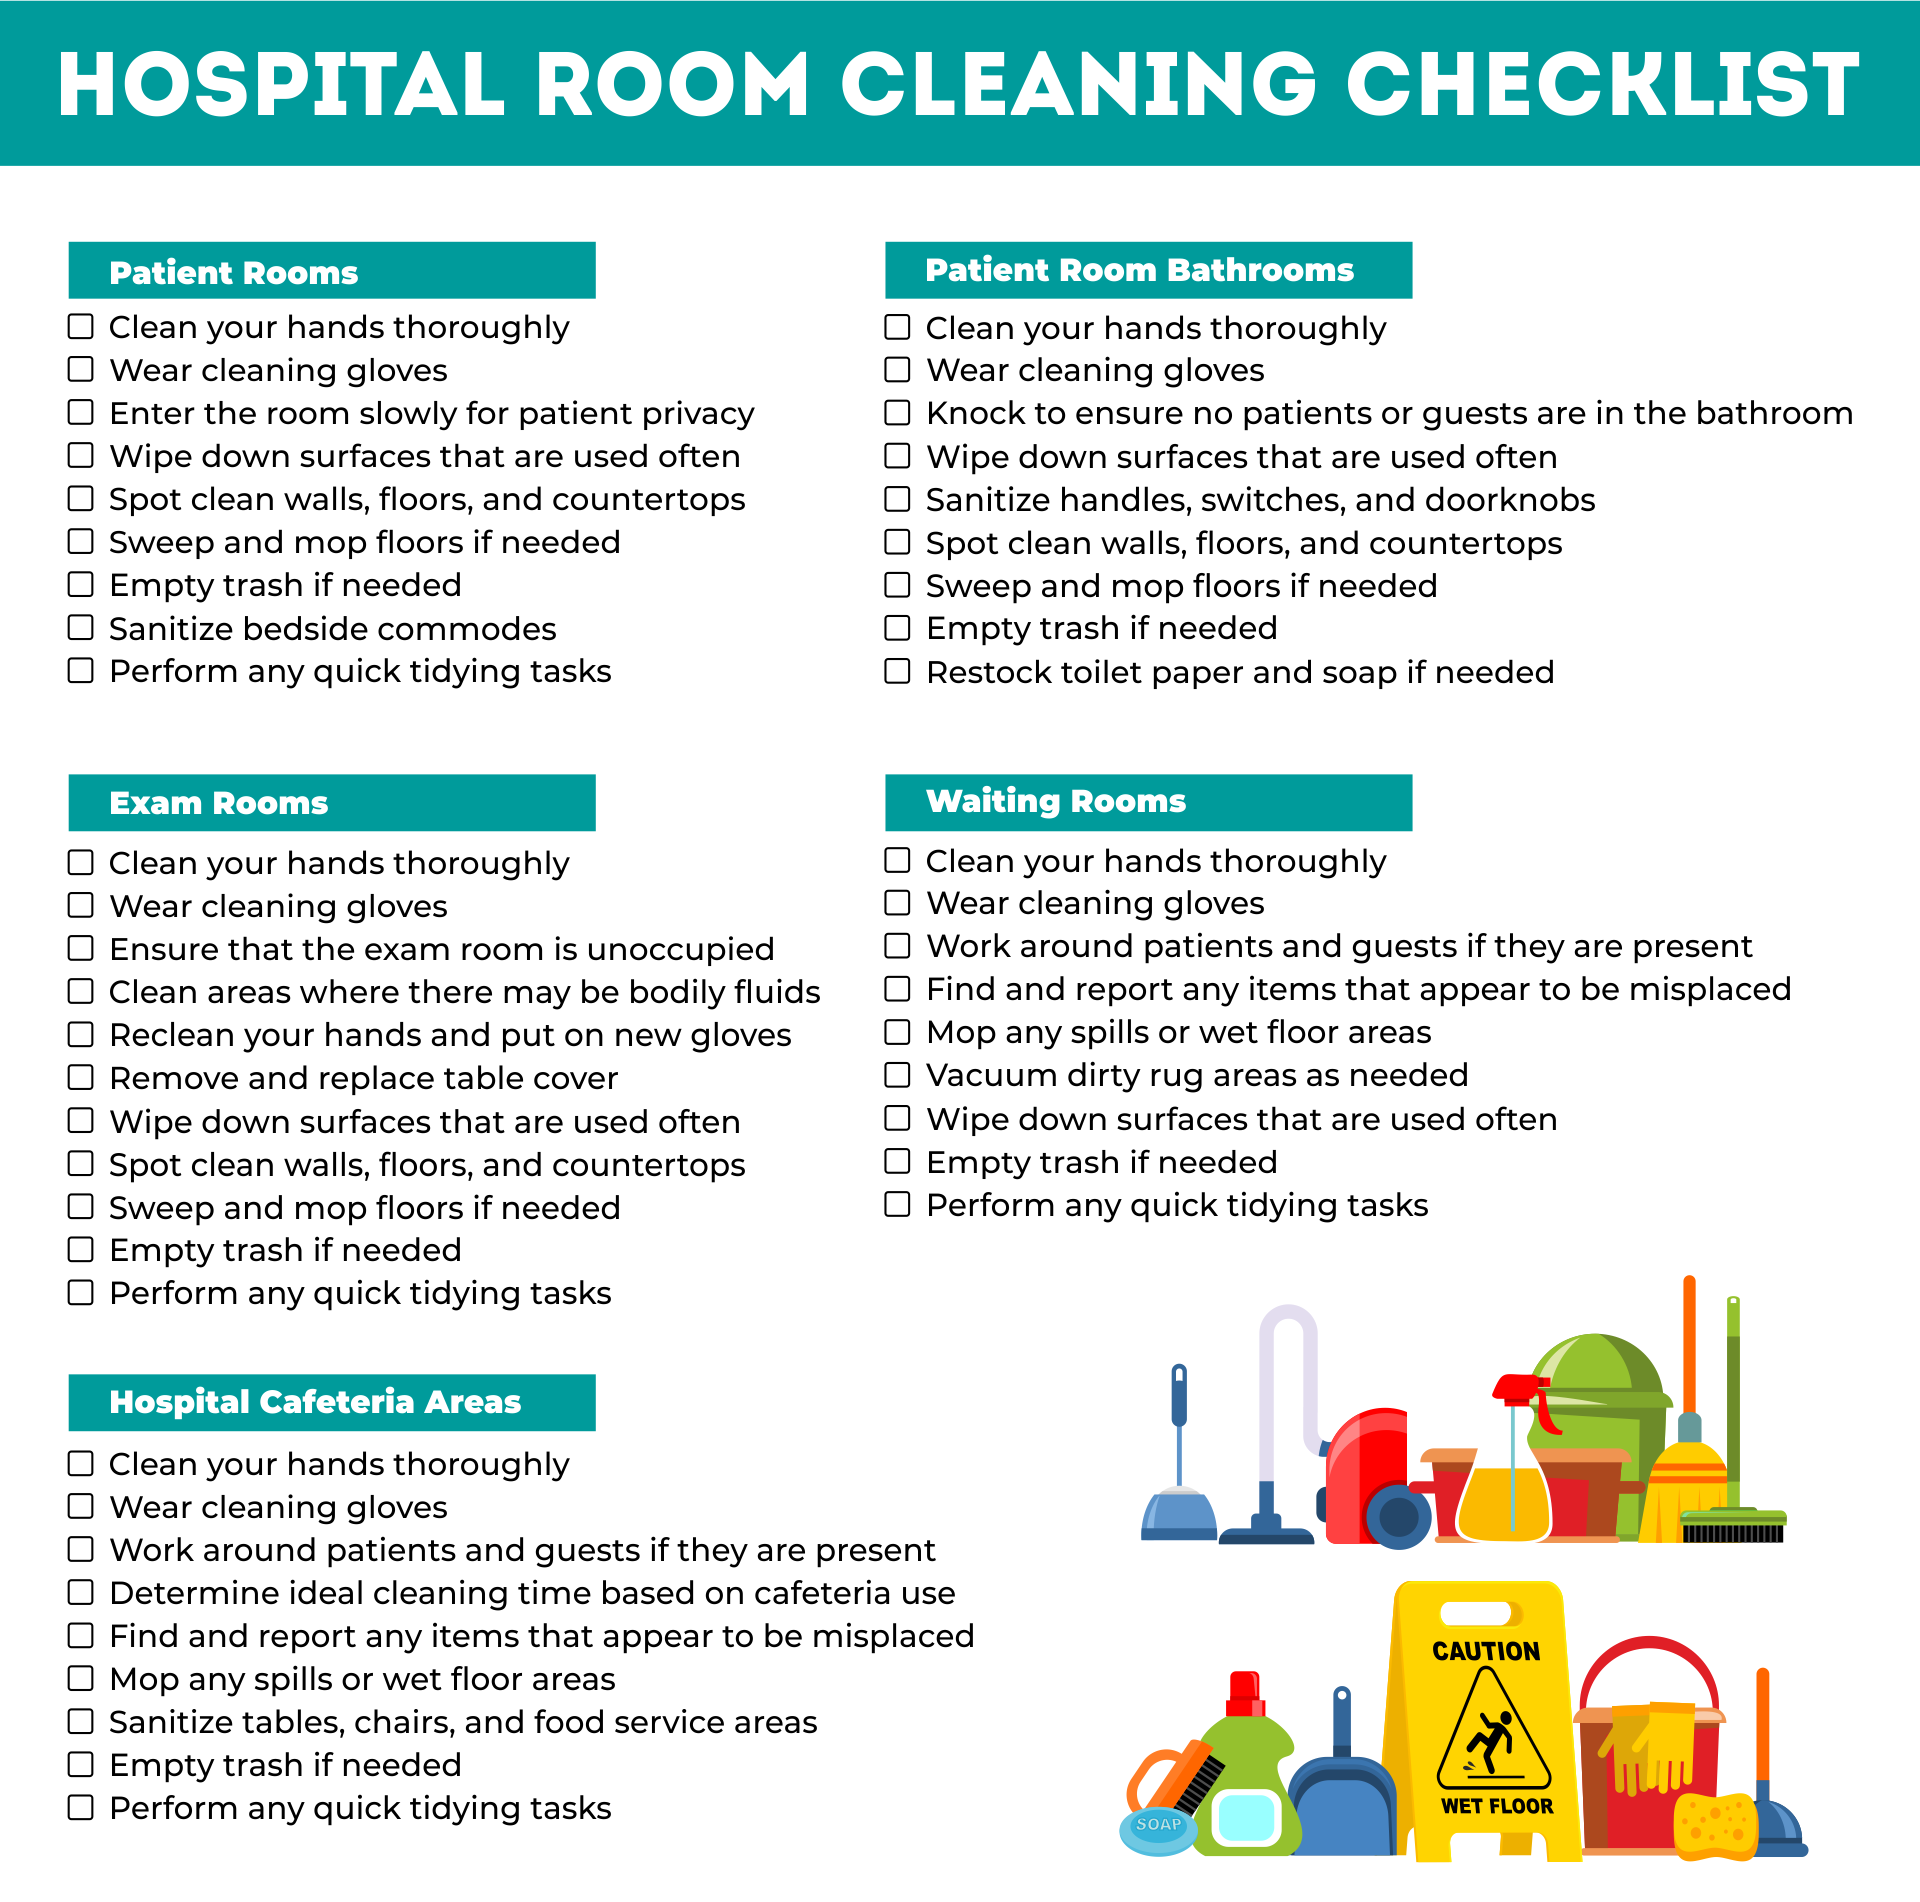 Hospital Room Cleaning Checklist 405167 